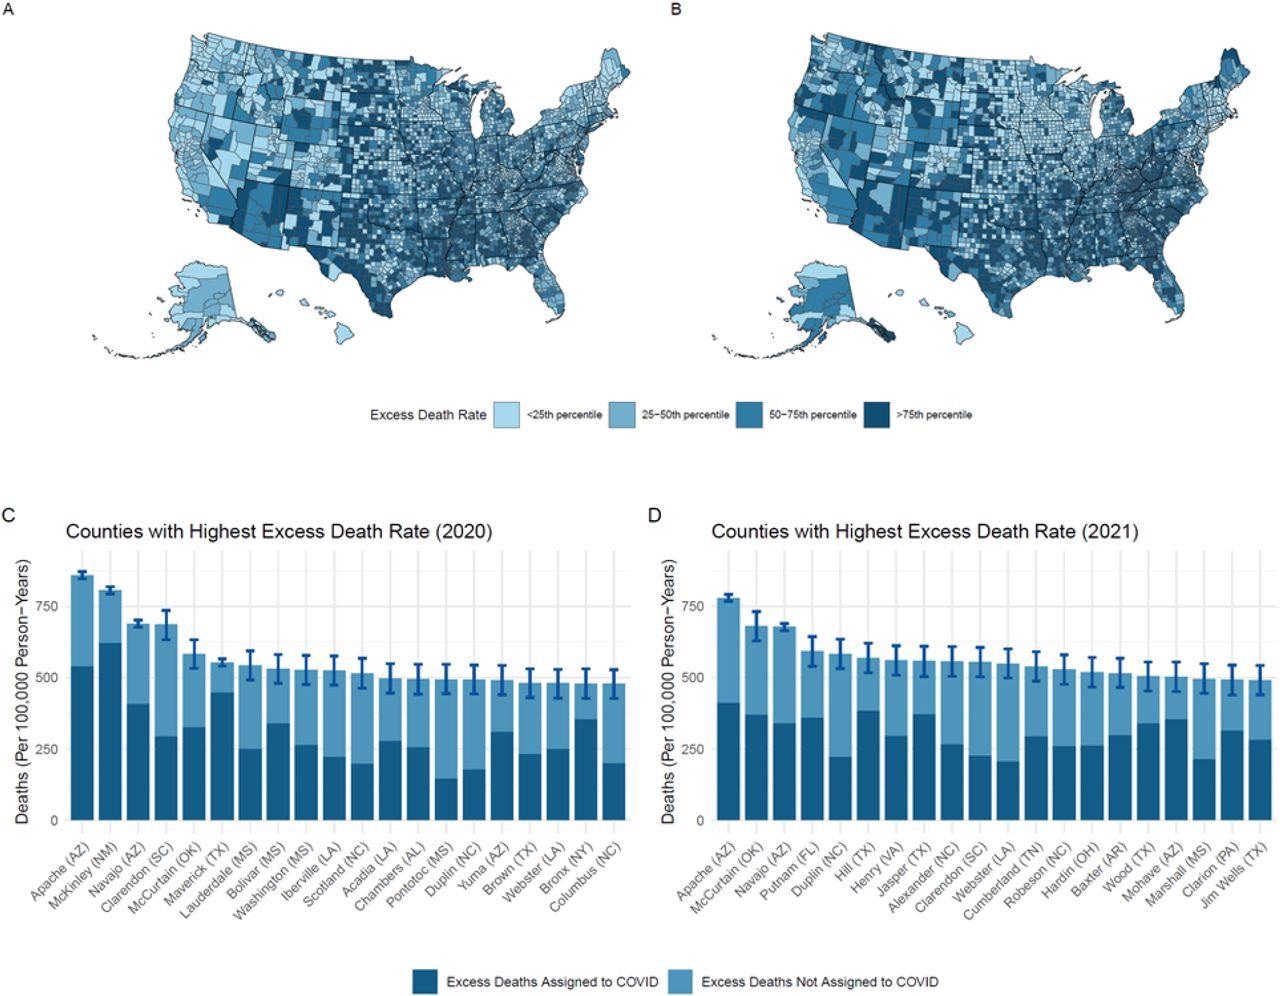 County excess mortality rates per 100,000, 2020-2021 Notes: Panels A and B show the geographic distribution of excess death rates in 2020 (A) and 2021 (B) as estimated by comparing the expected number of deaths from our model to the actual number of deaths. Panels C and D report excess and COVID deaths rates for the counties with the highest excess deaths rates 2020 and 2021 respectively. Counties with less than 30,000 residents and less than 60 COVID deaths across the two years were excluded from the rankings in the barplots.